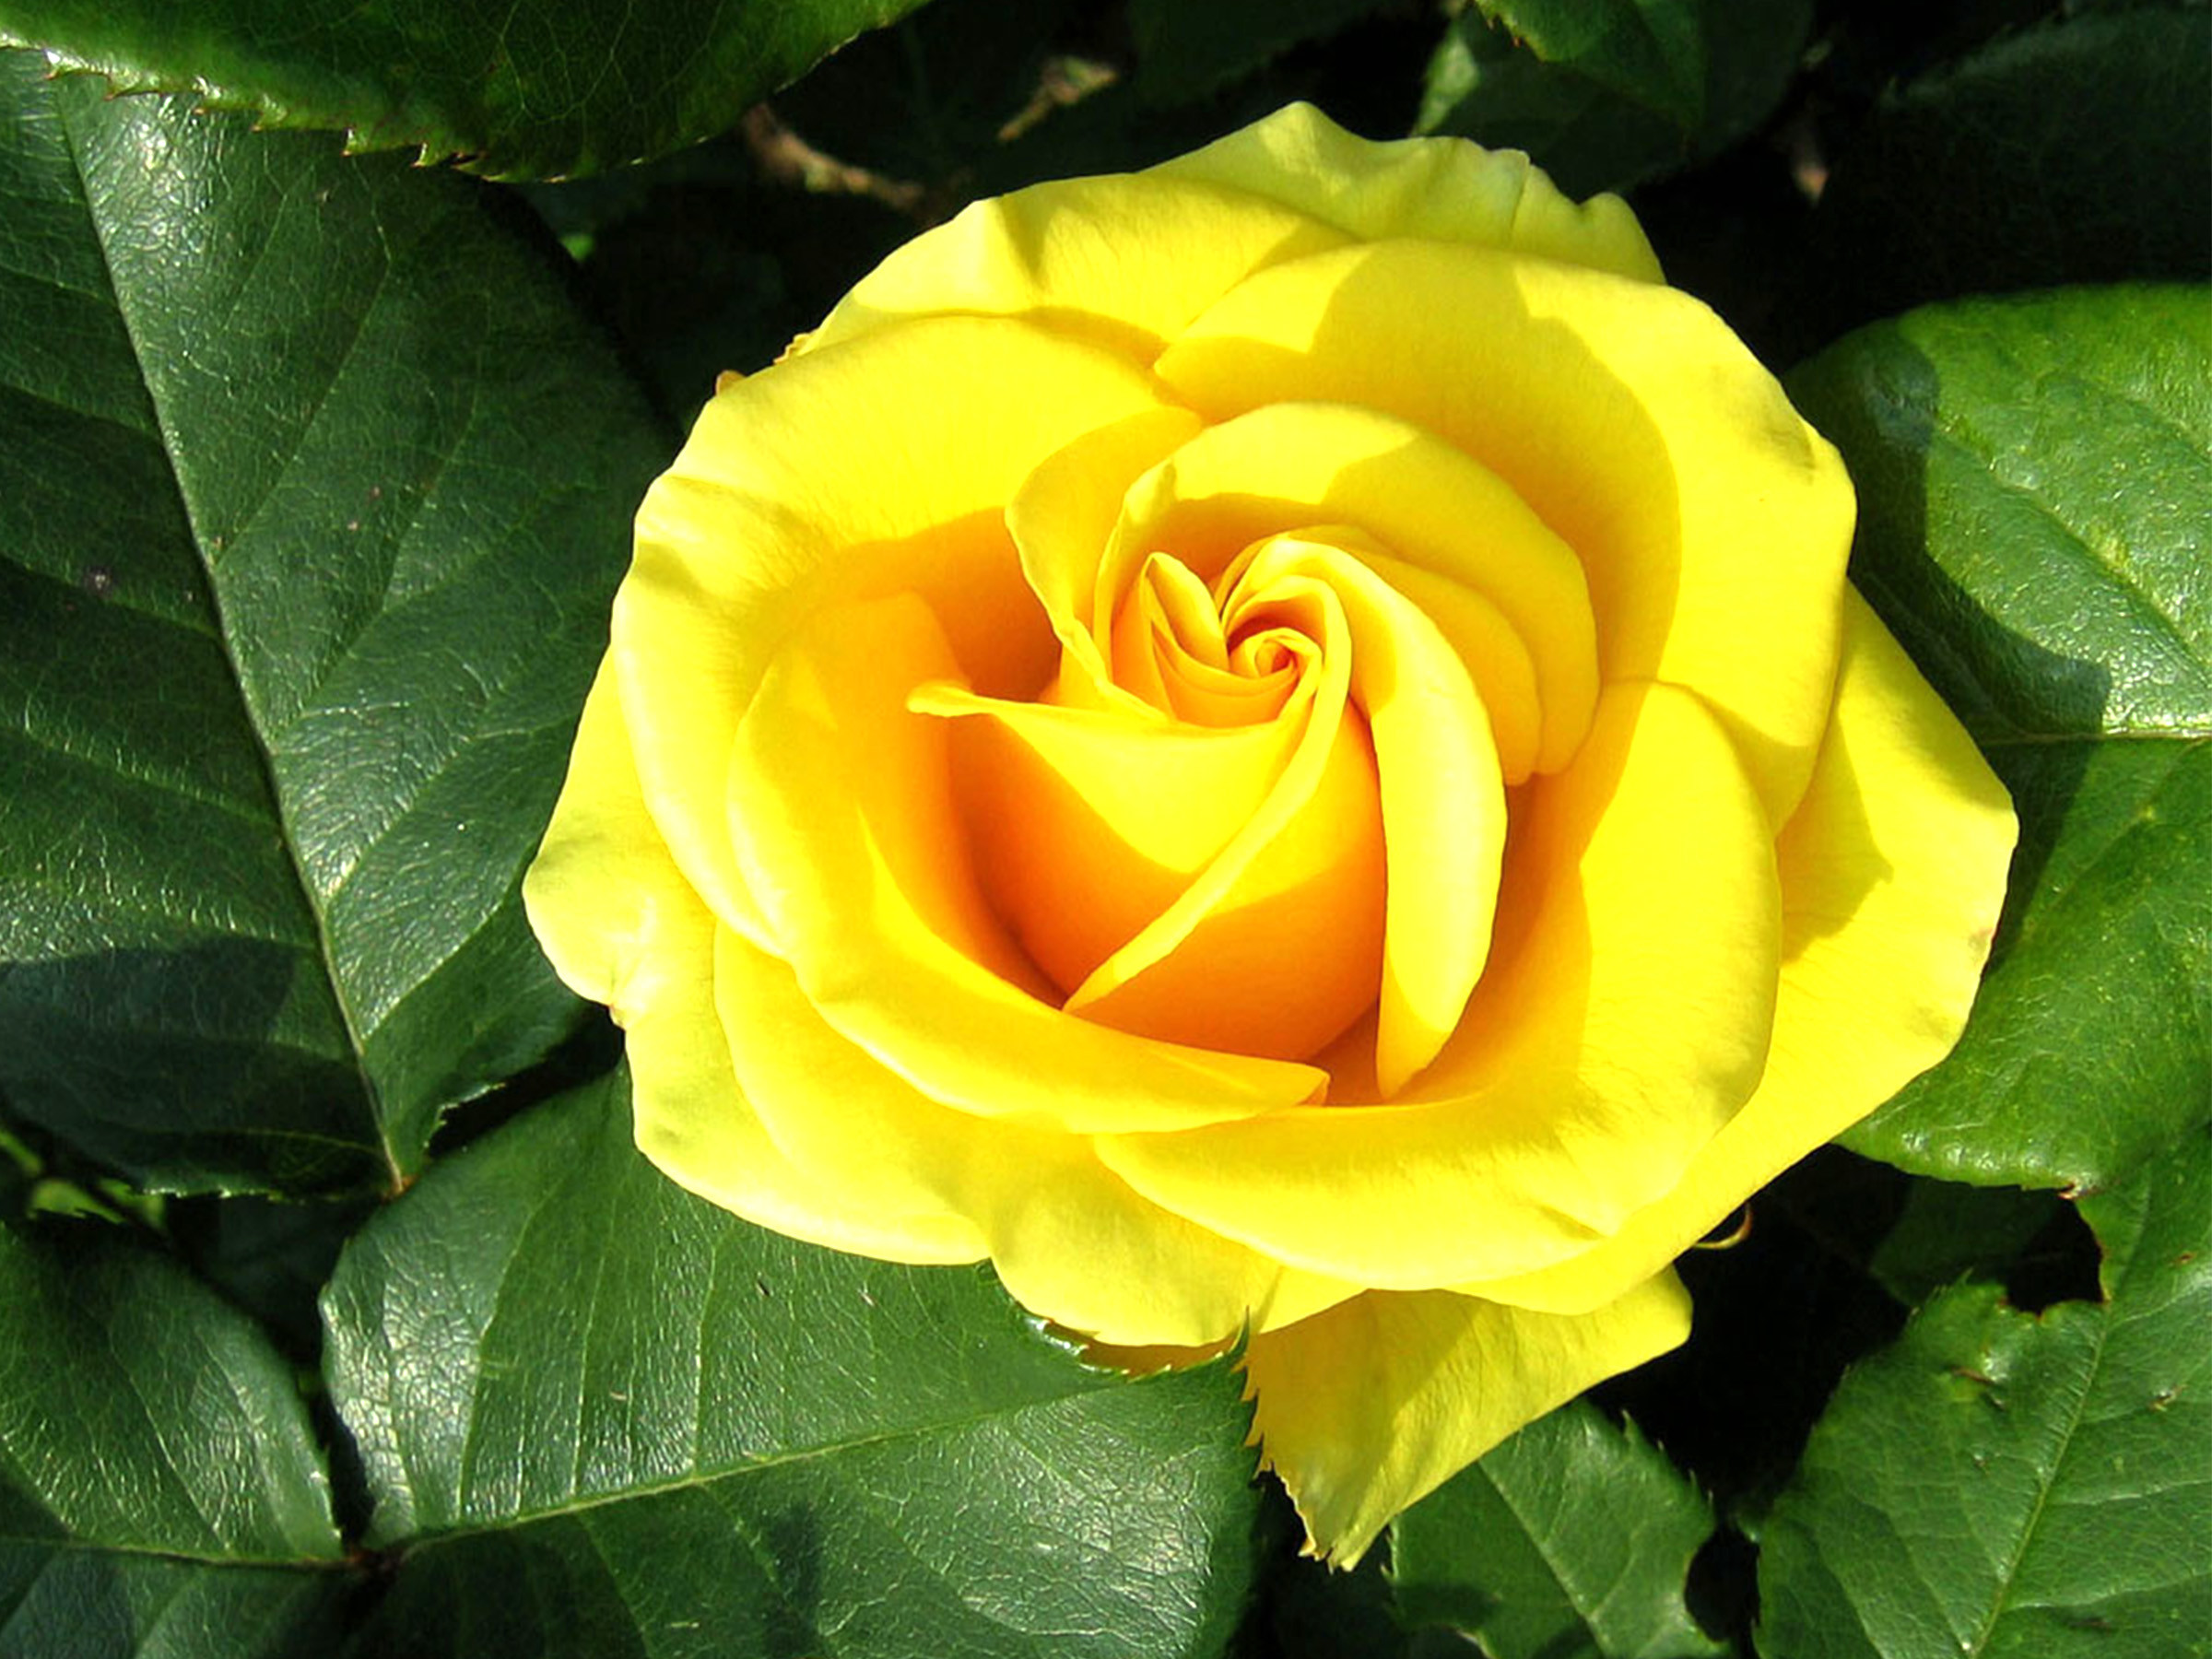 Yellow Rose Flower Wallpaper With Green Leaves HD Colour Rose Image HD